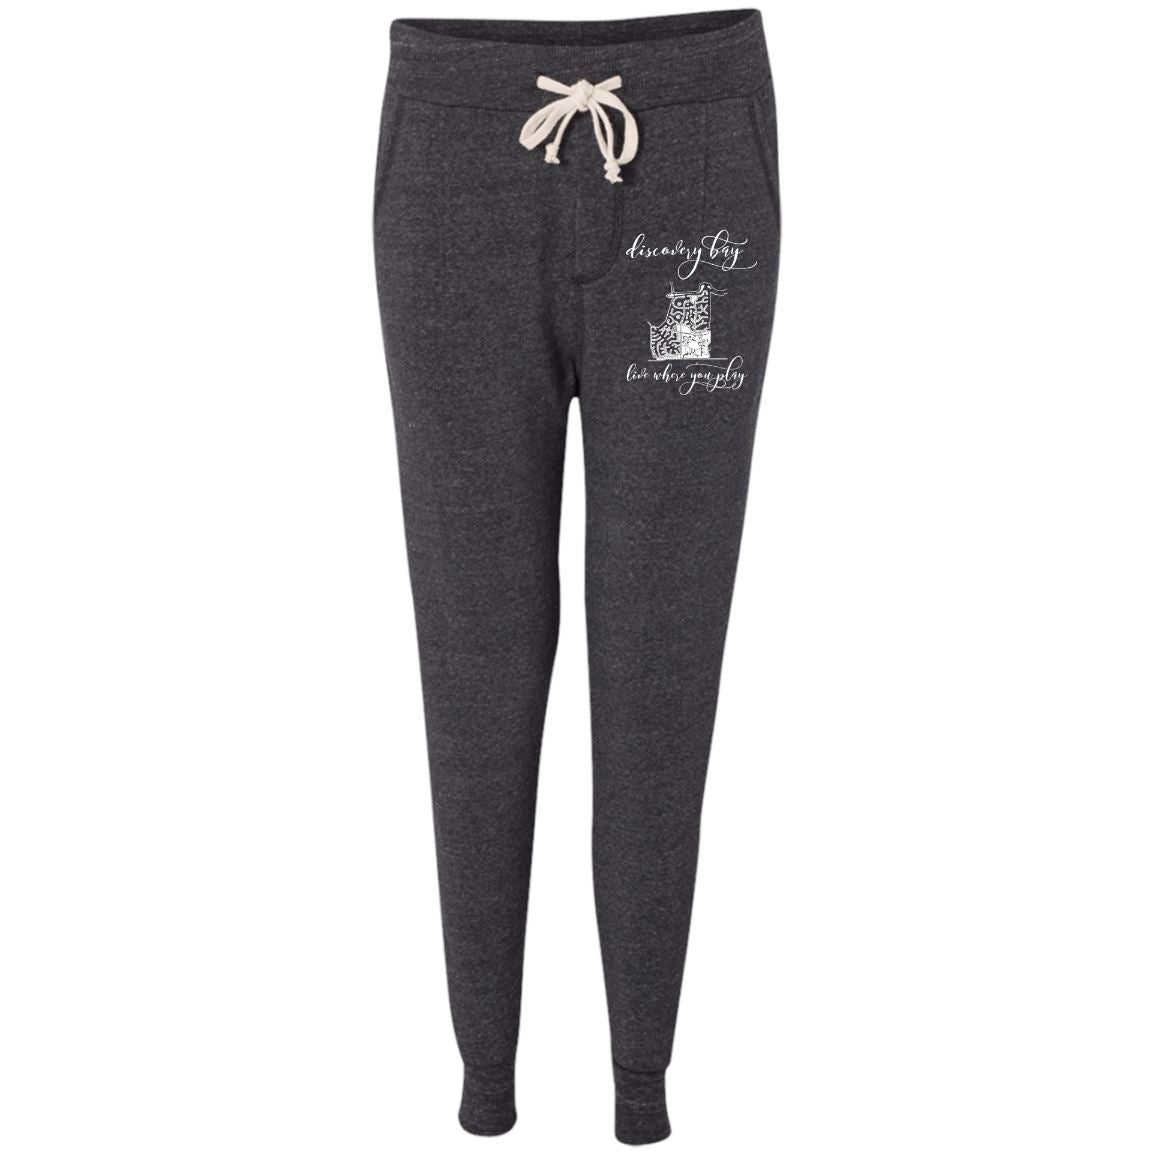 Discovery Bay Embroidered Ladies' Fleece Jogger - Houseboat Kings